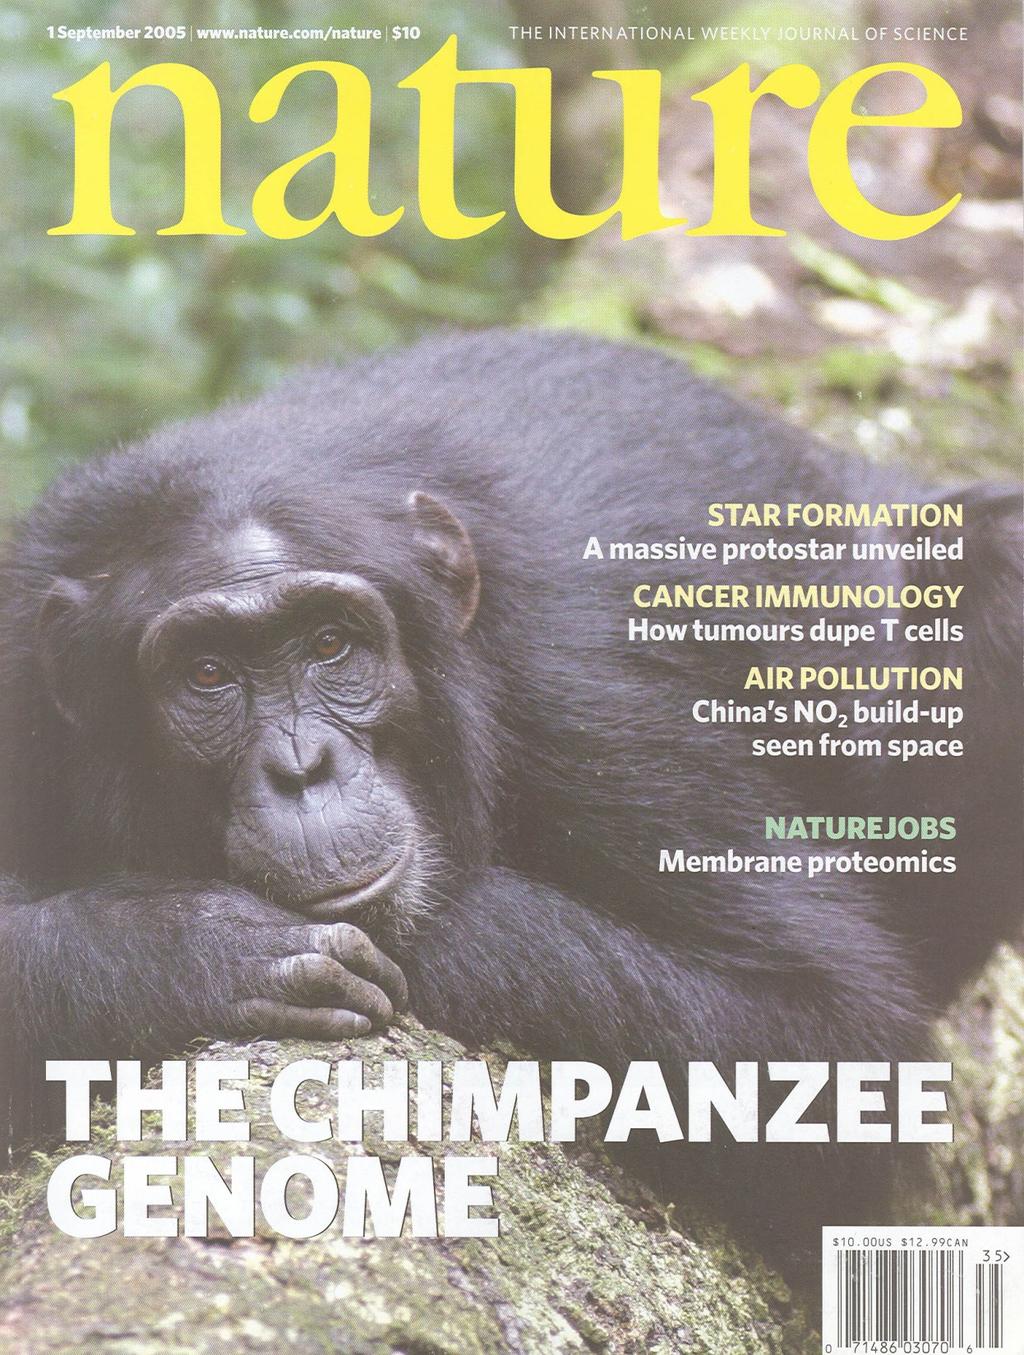 What about humans and chimpanzees? We differ by around 35,000,000 nucleotide substitutions. Given 3x10 9 base pairs per haploid genome, that s roughly 1/86 base pairs, or K 0.012 per site.